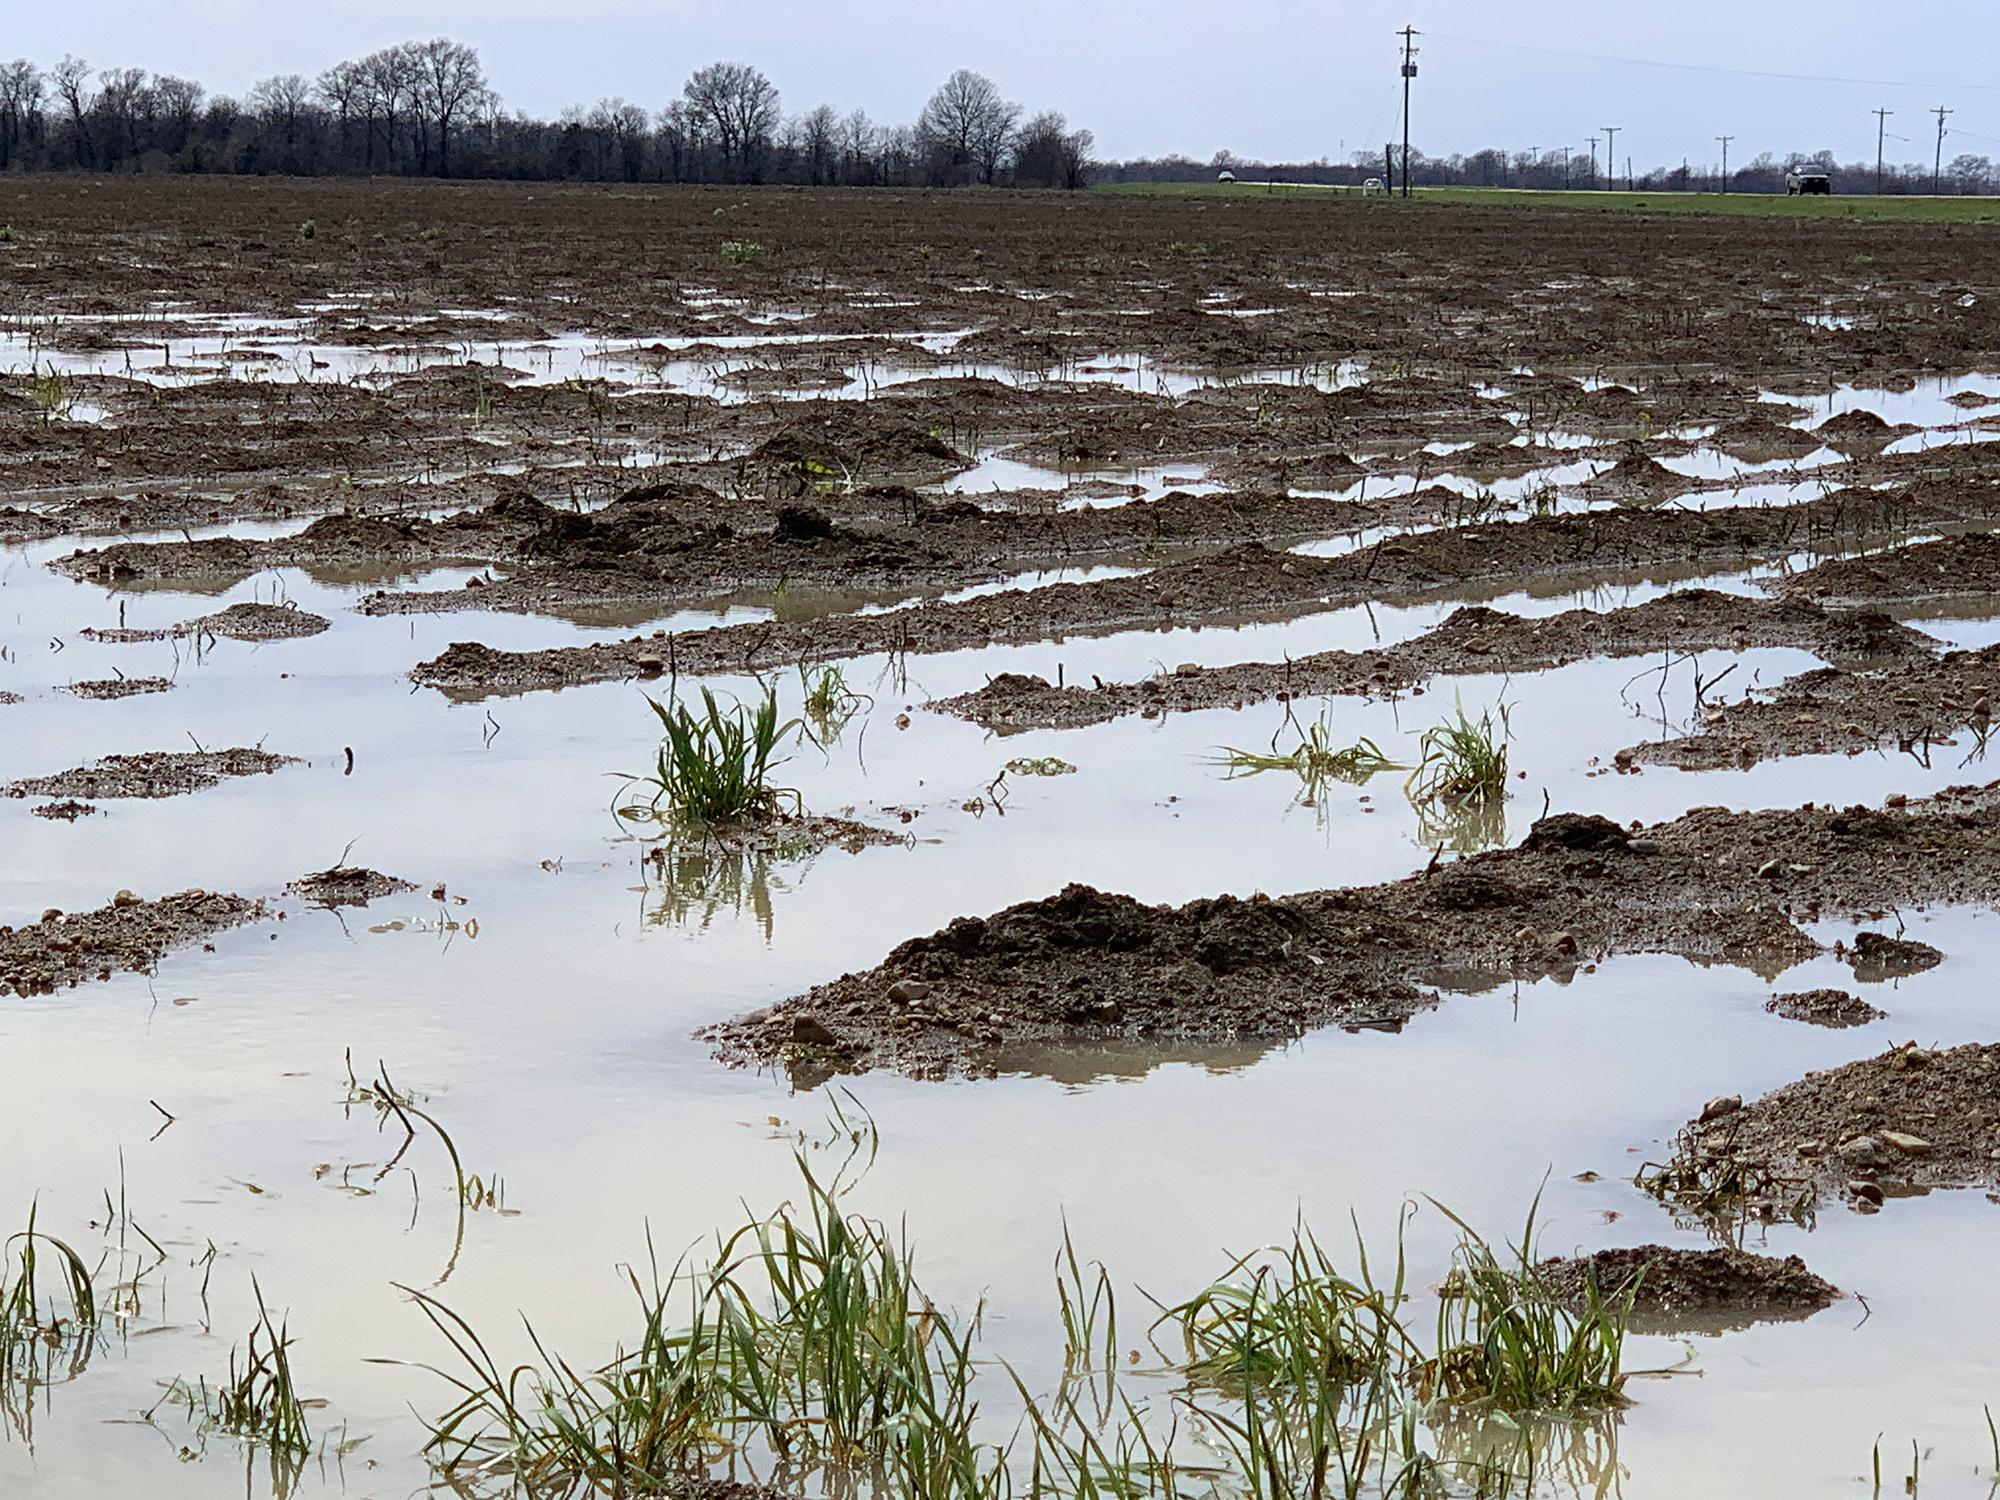 An overcast sky is reflected in water standing over and between the rows of a muddy field.